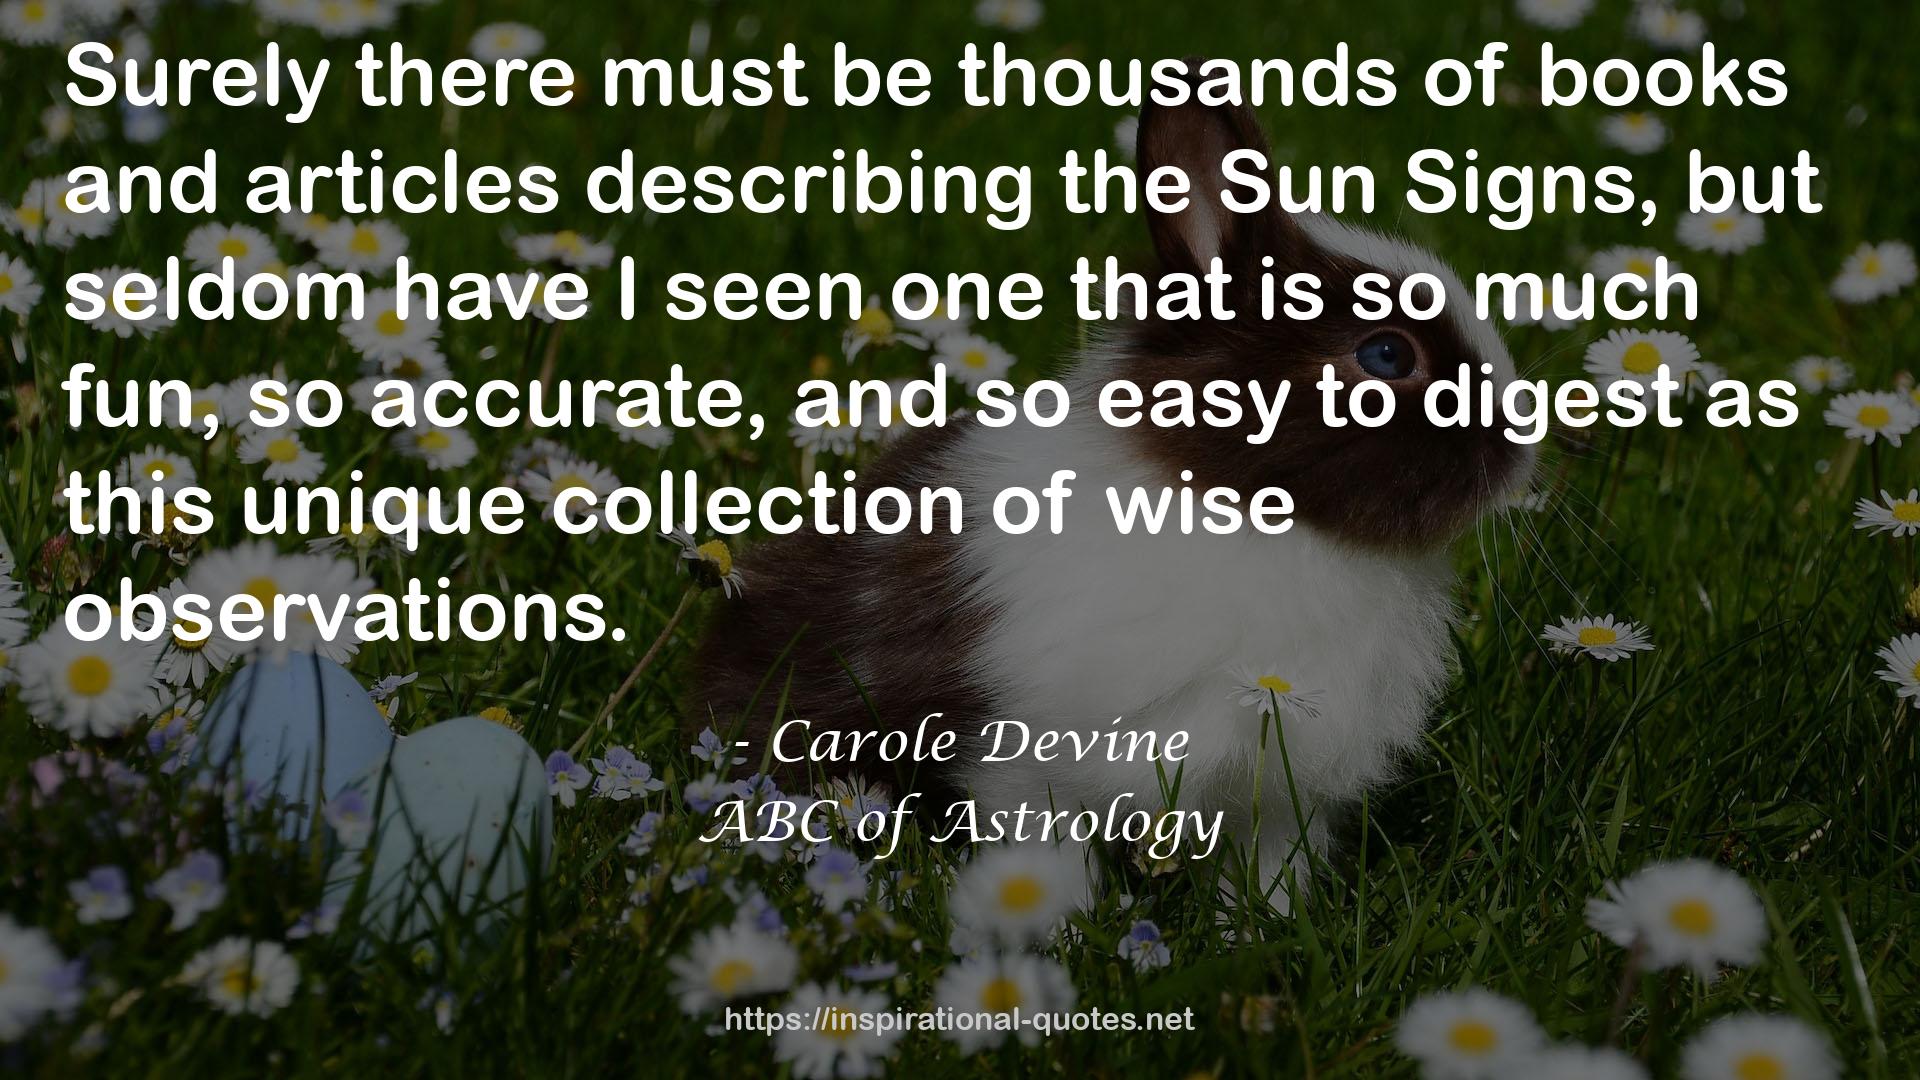 ABC of Astrology QUOTES